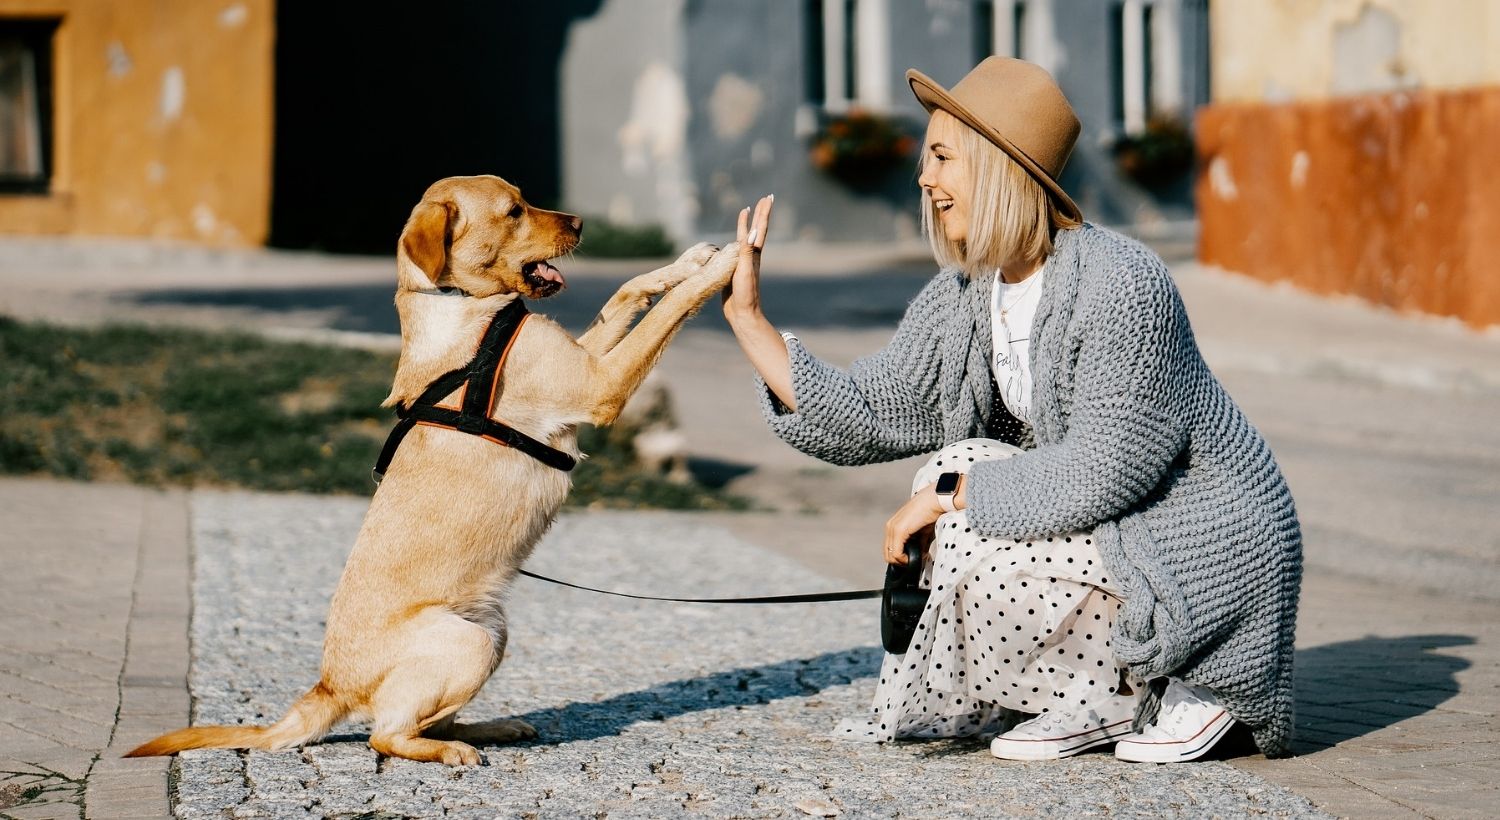 Dog and Woman giving each other high five (or high paw) on the street